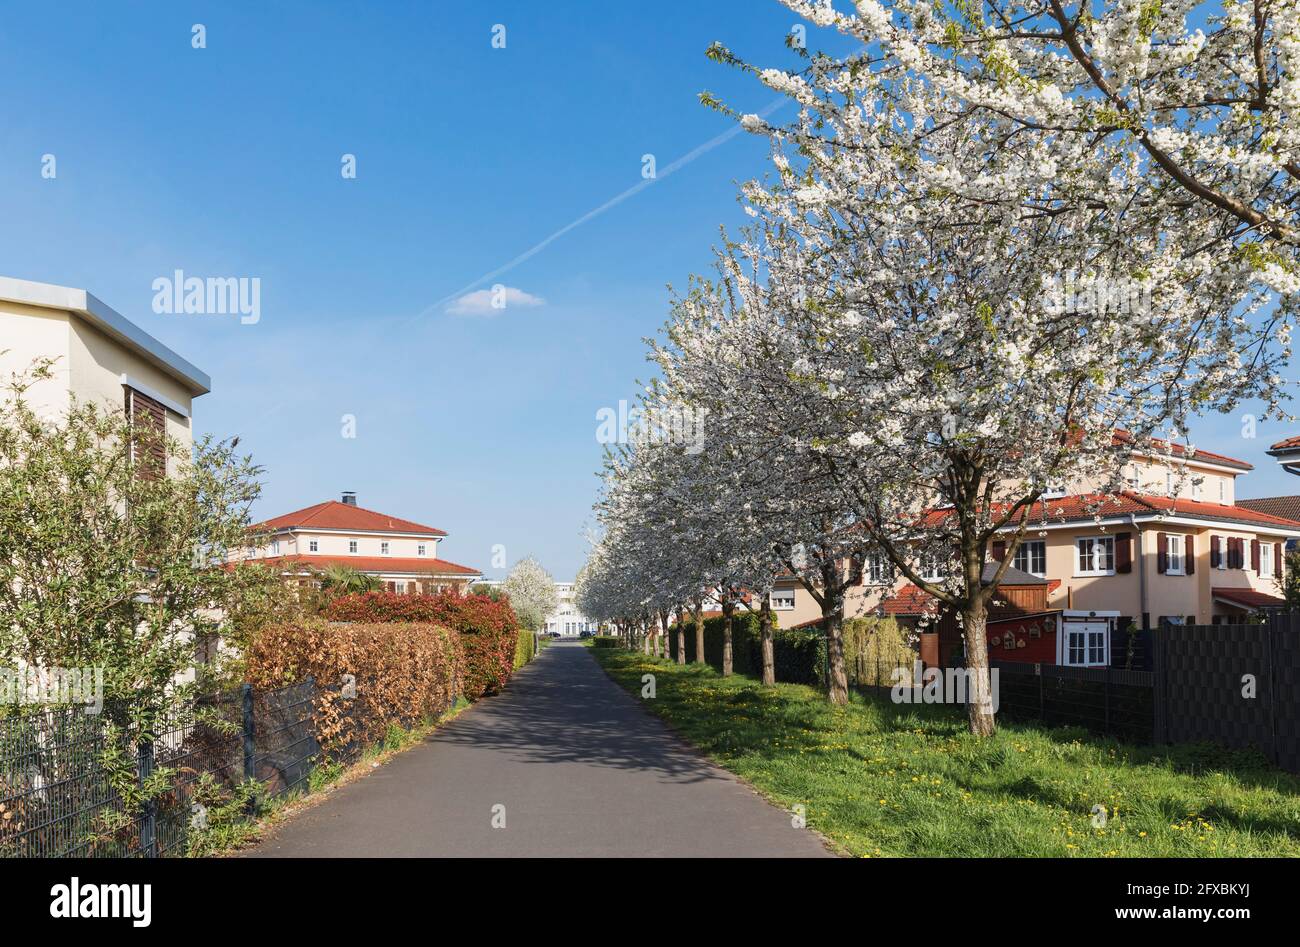 Germany, North Rhine Westphalia, Cologne, Cherry blossoms in exclusive residential area Stock Photo